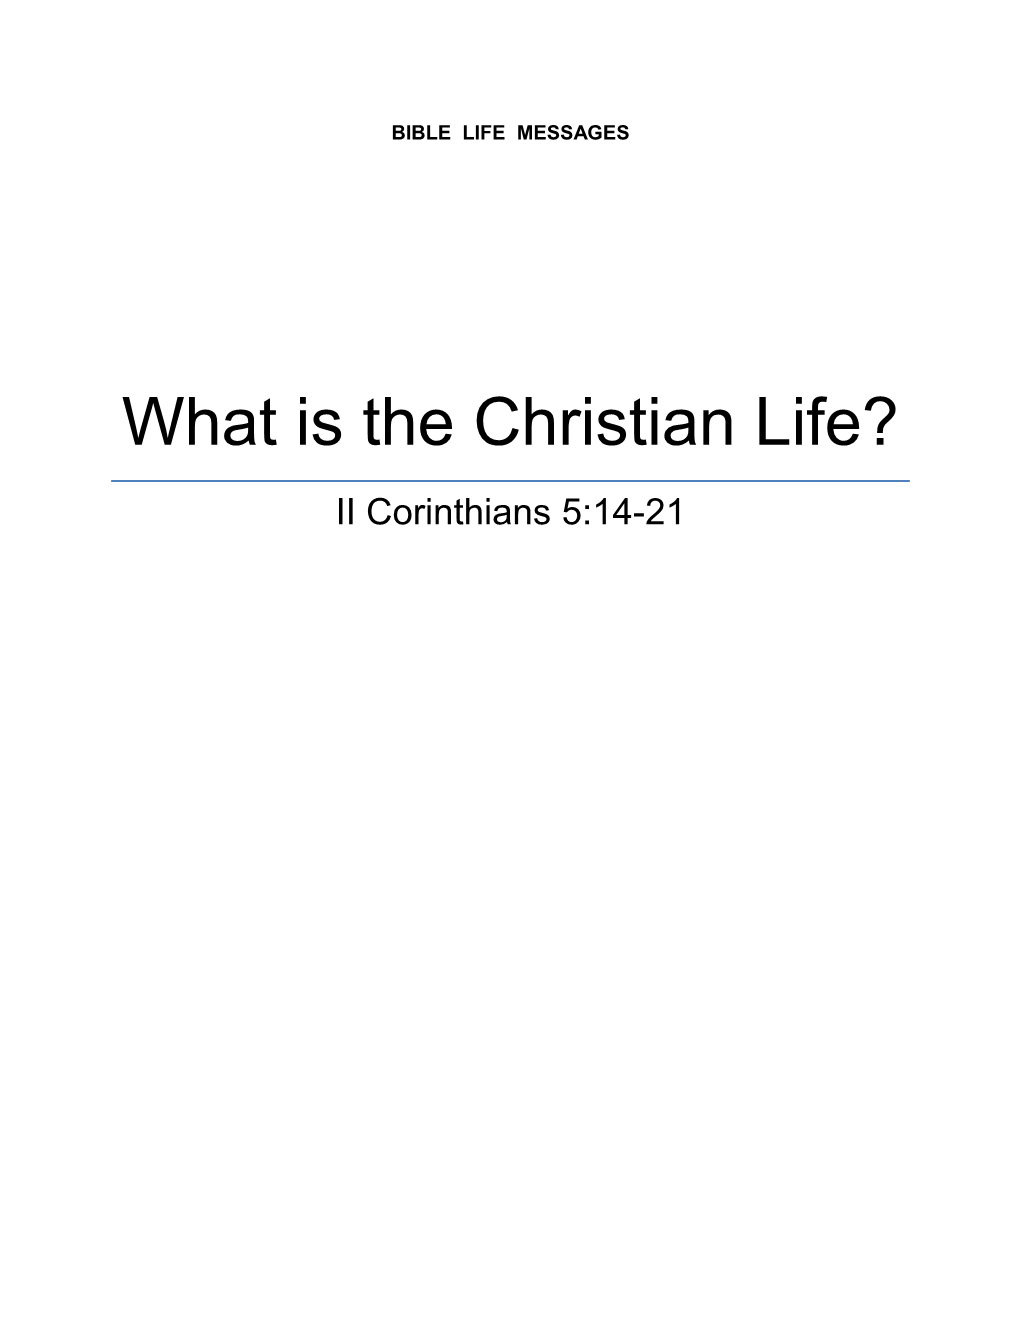 What Is the Christian Life?